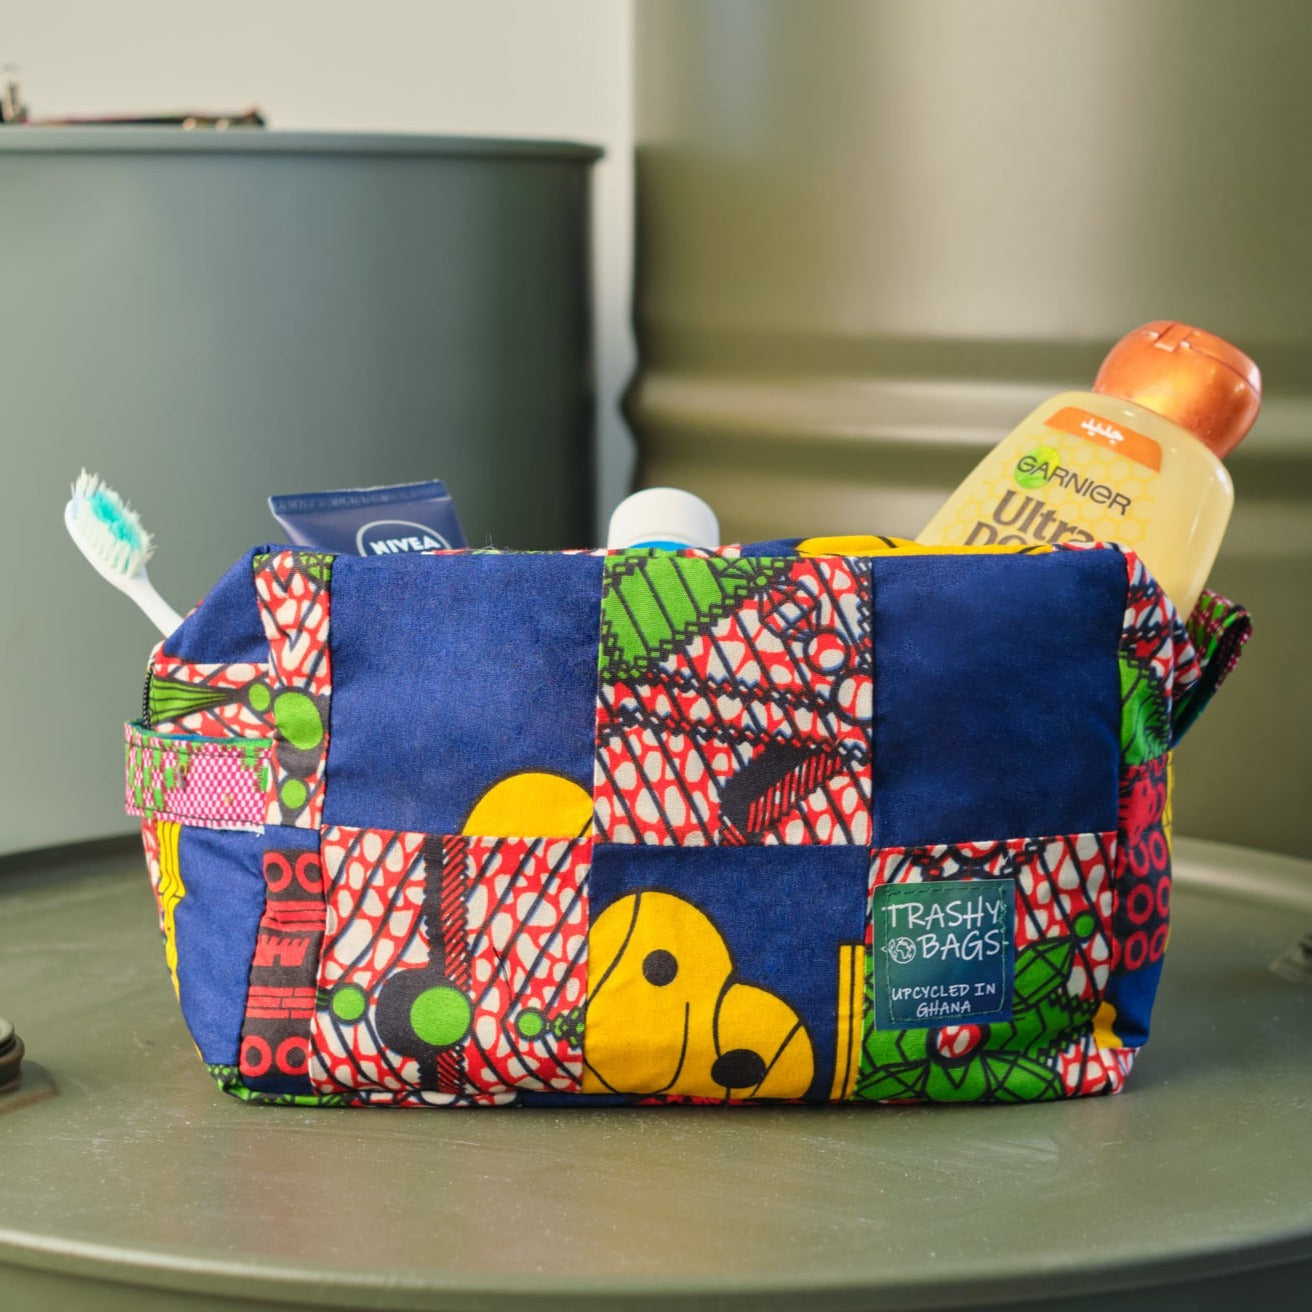 Trashy Bags Africa Recycled Fabric Make Up Wash Bag